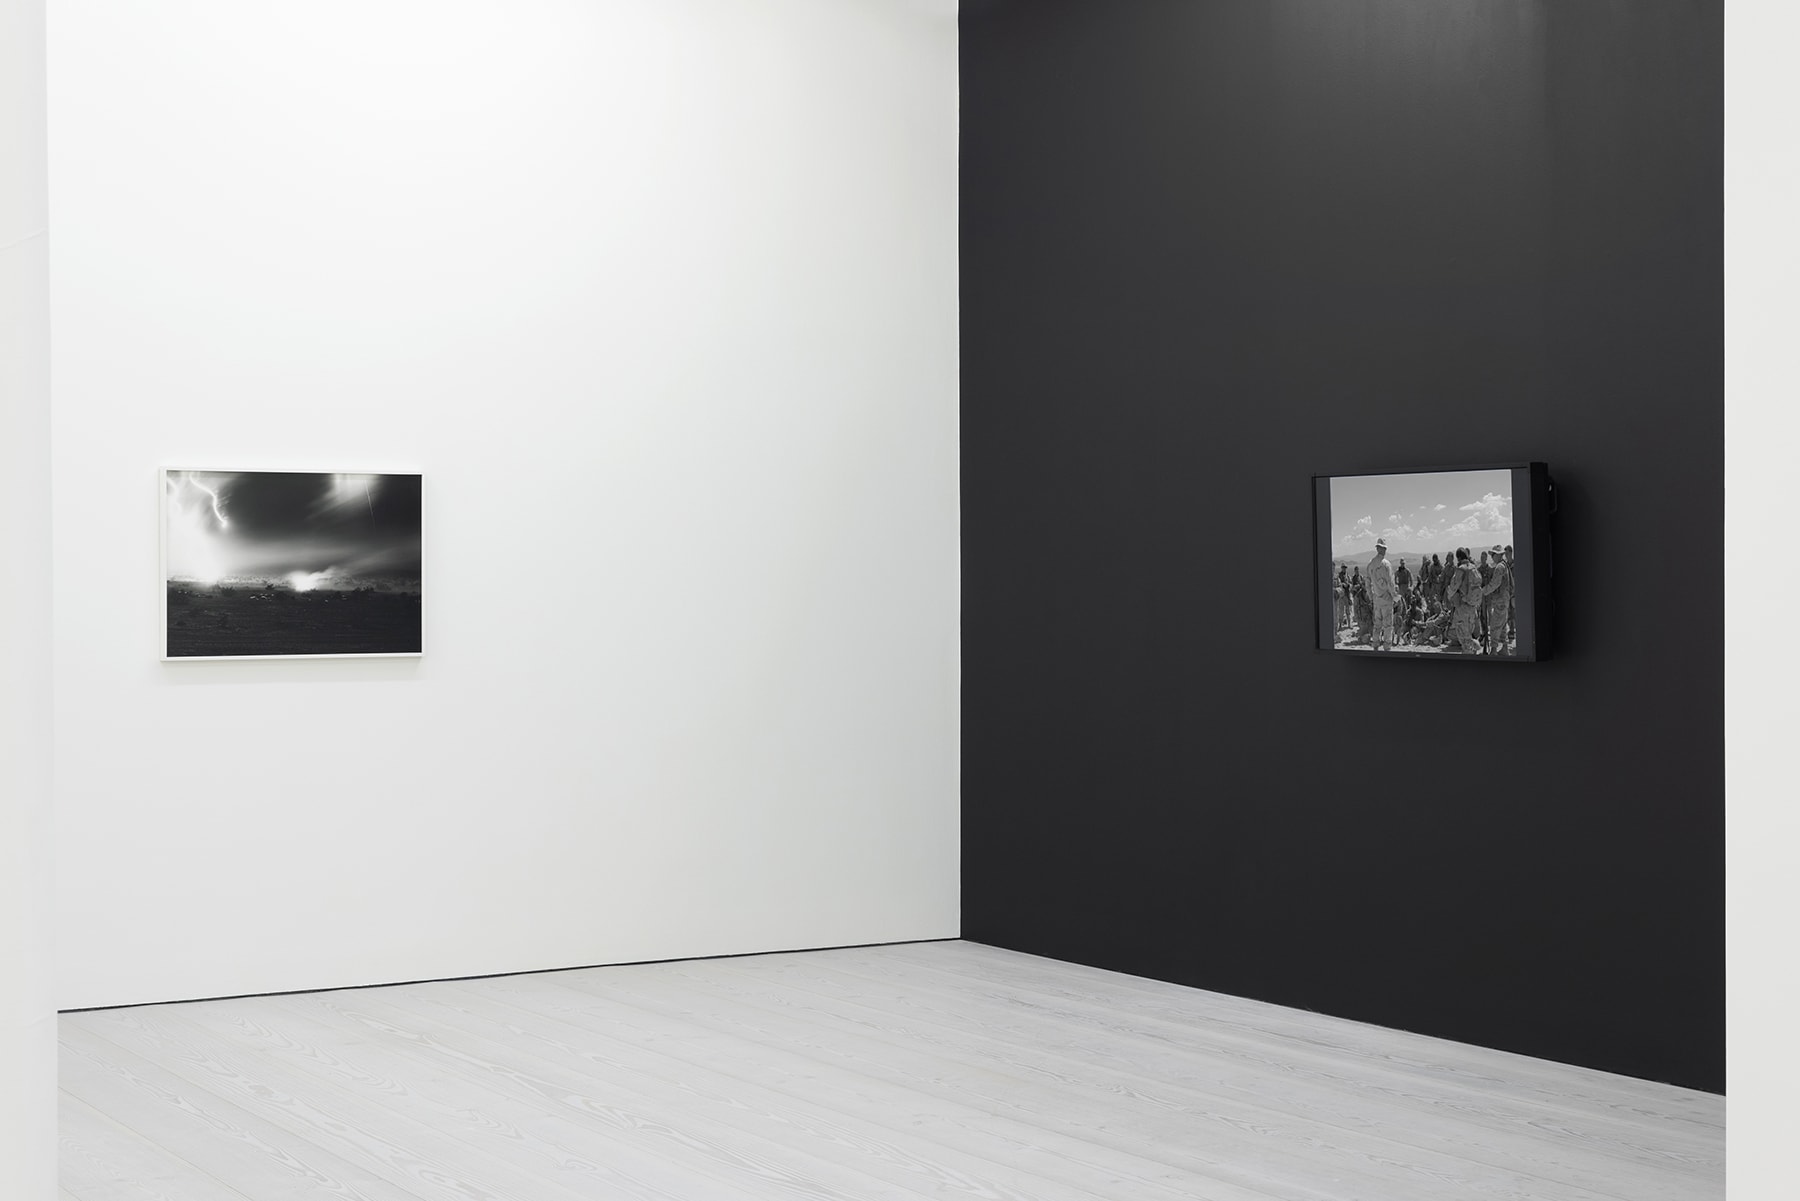 installation view of black and white photographs of war simulation by An-My Le